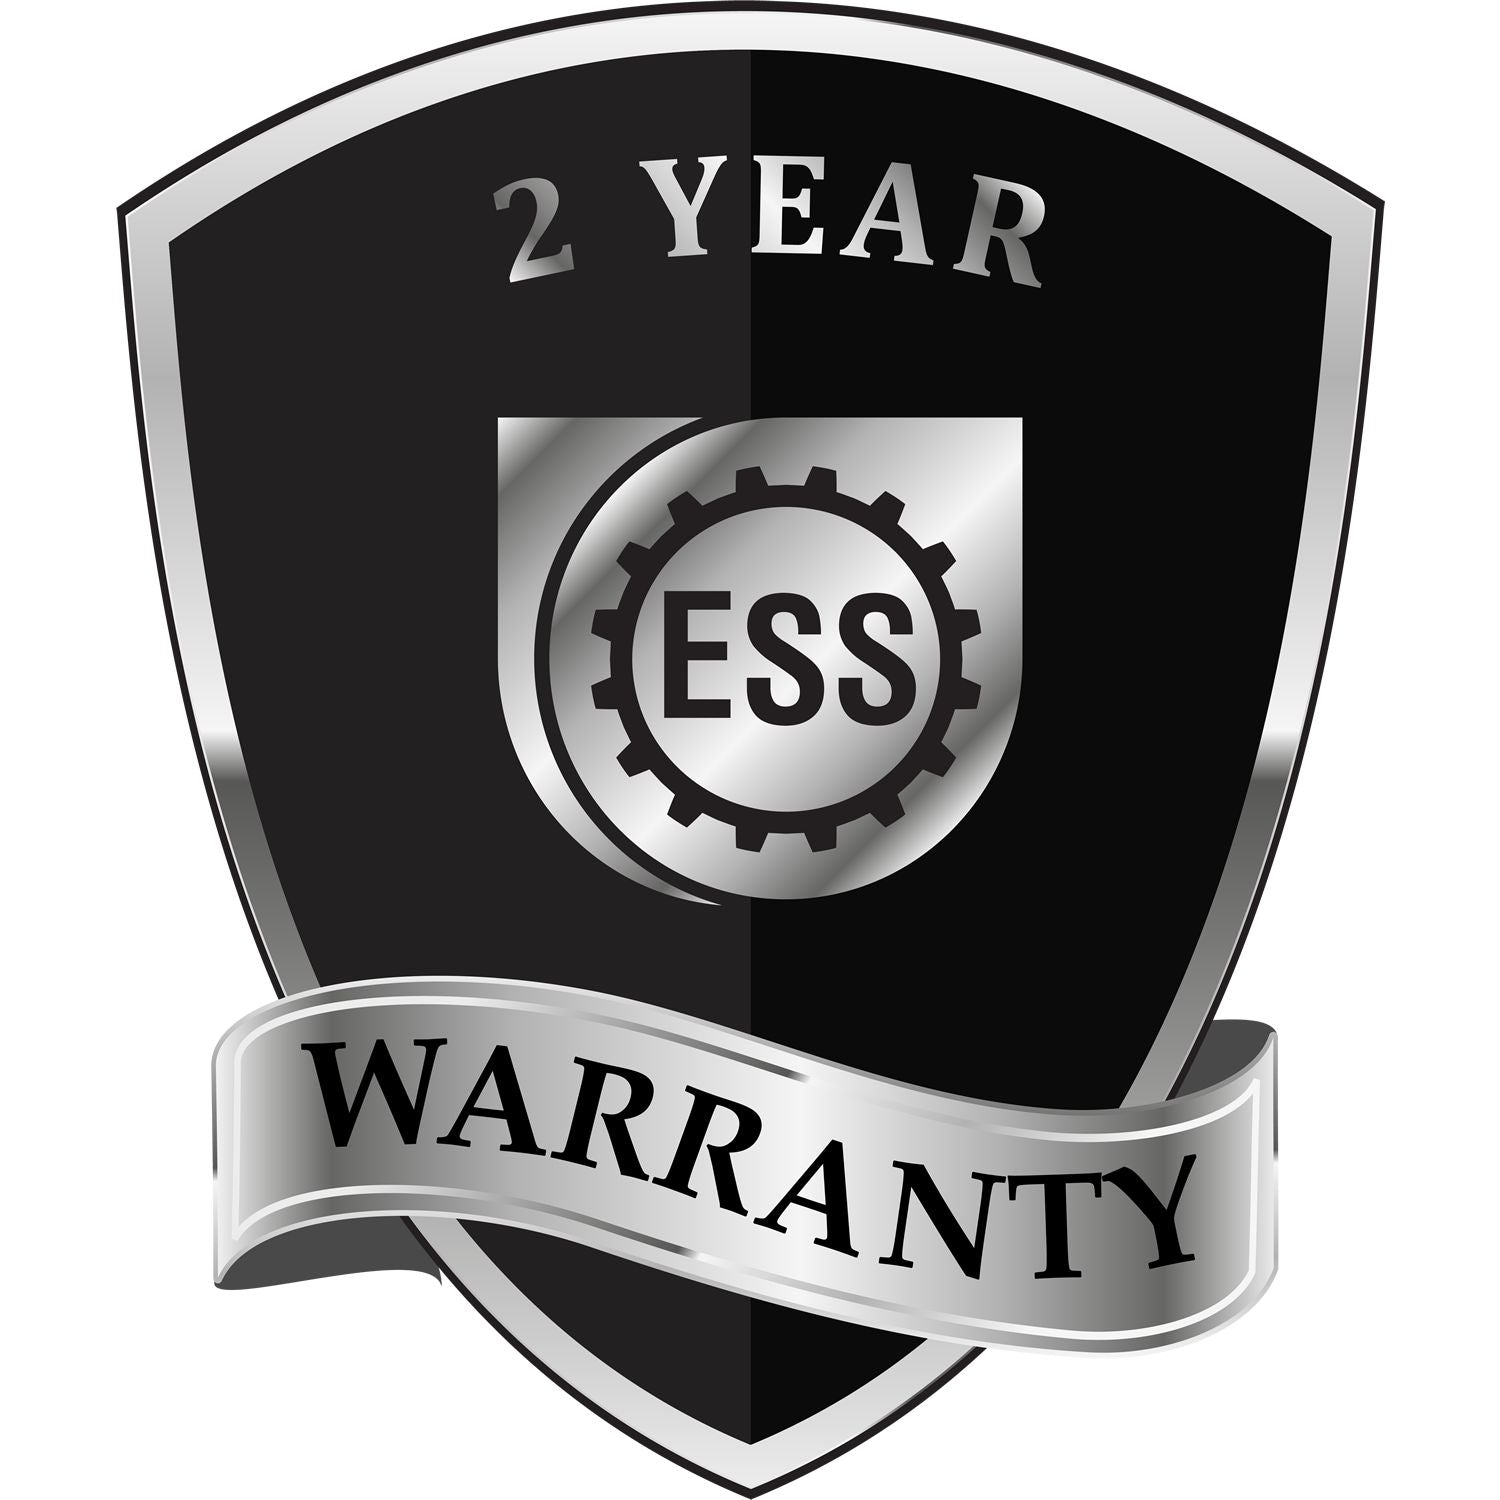 A badge or emblem showing a warranty icon for the Heavy Duty Cast Iron North Carolina Architect Embosser